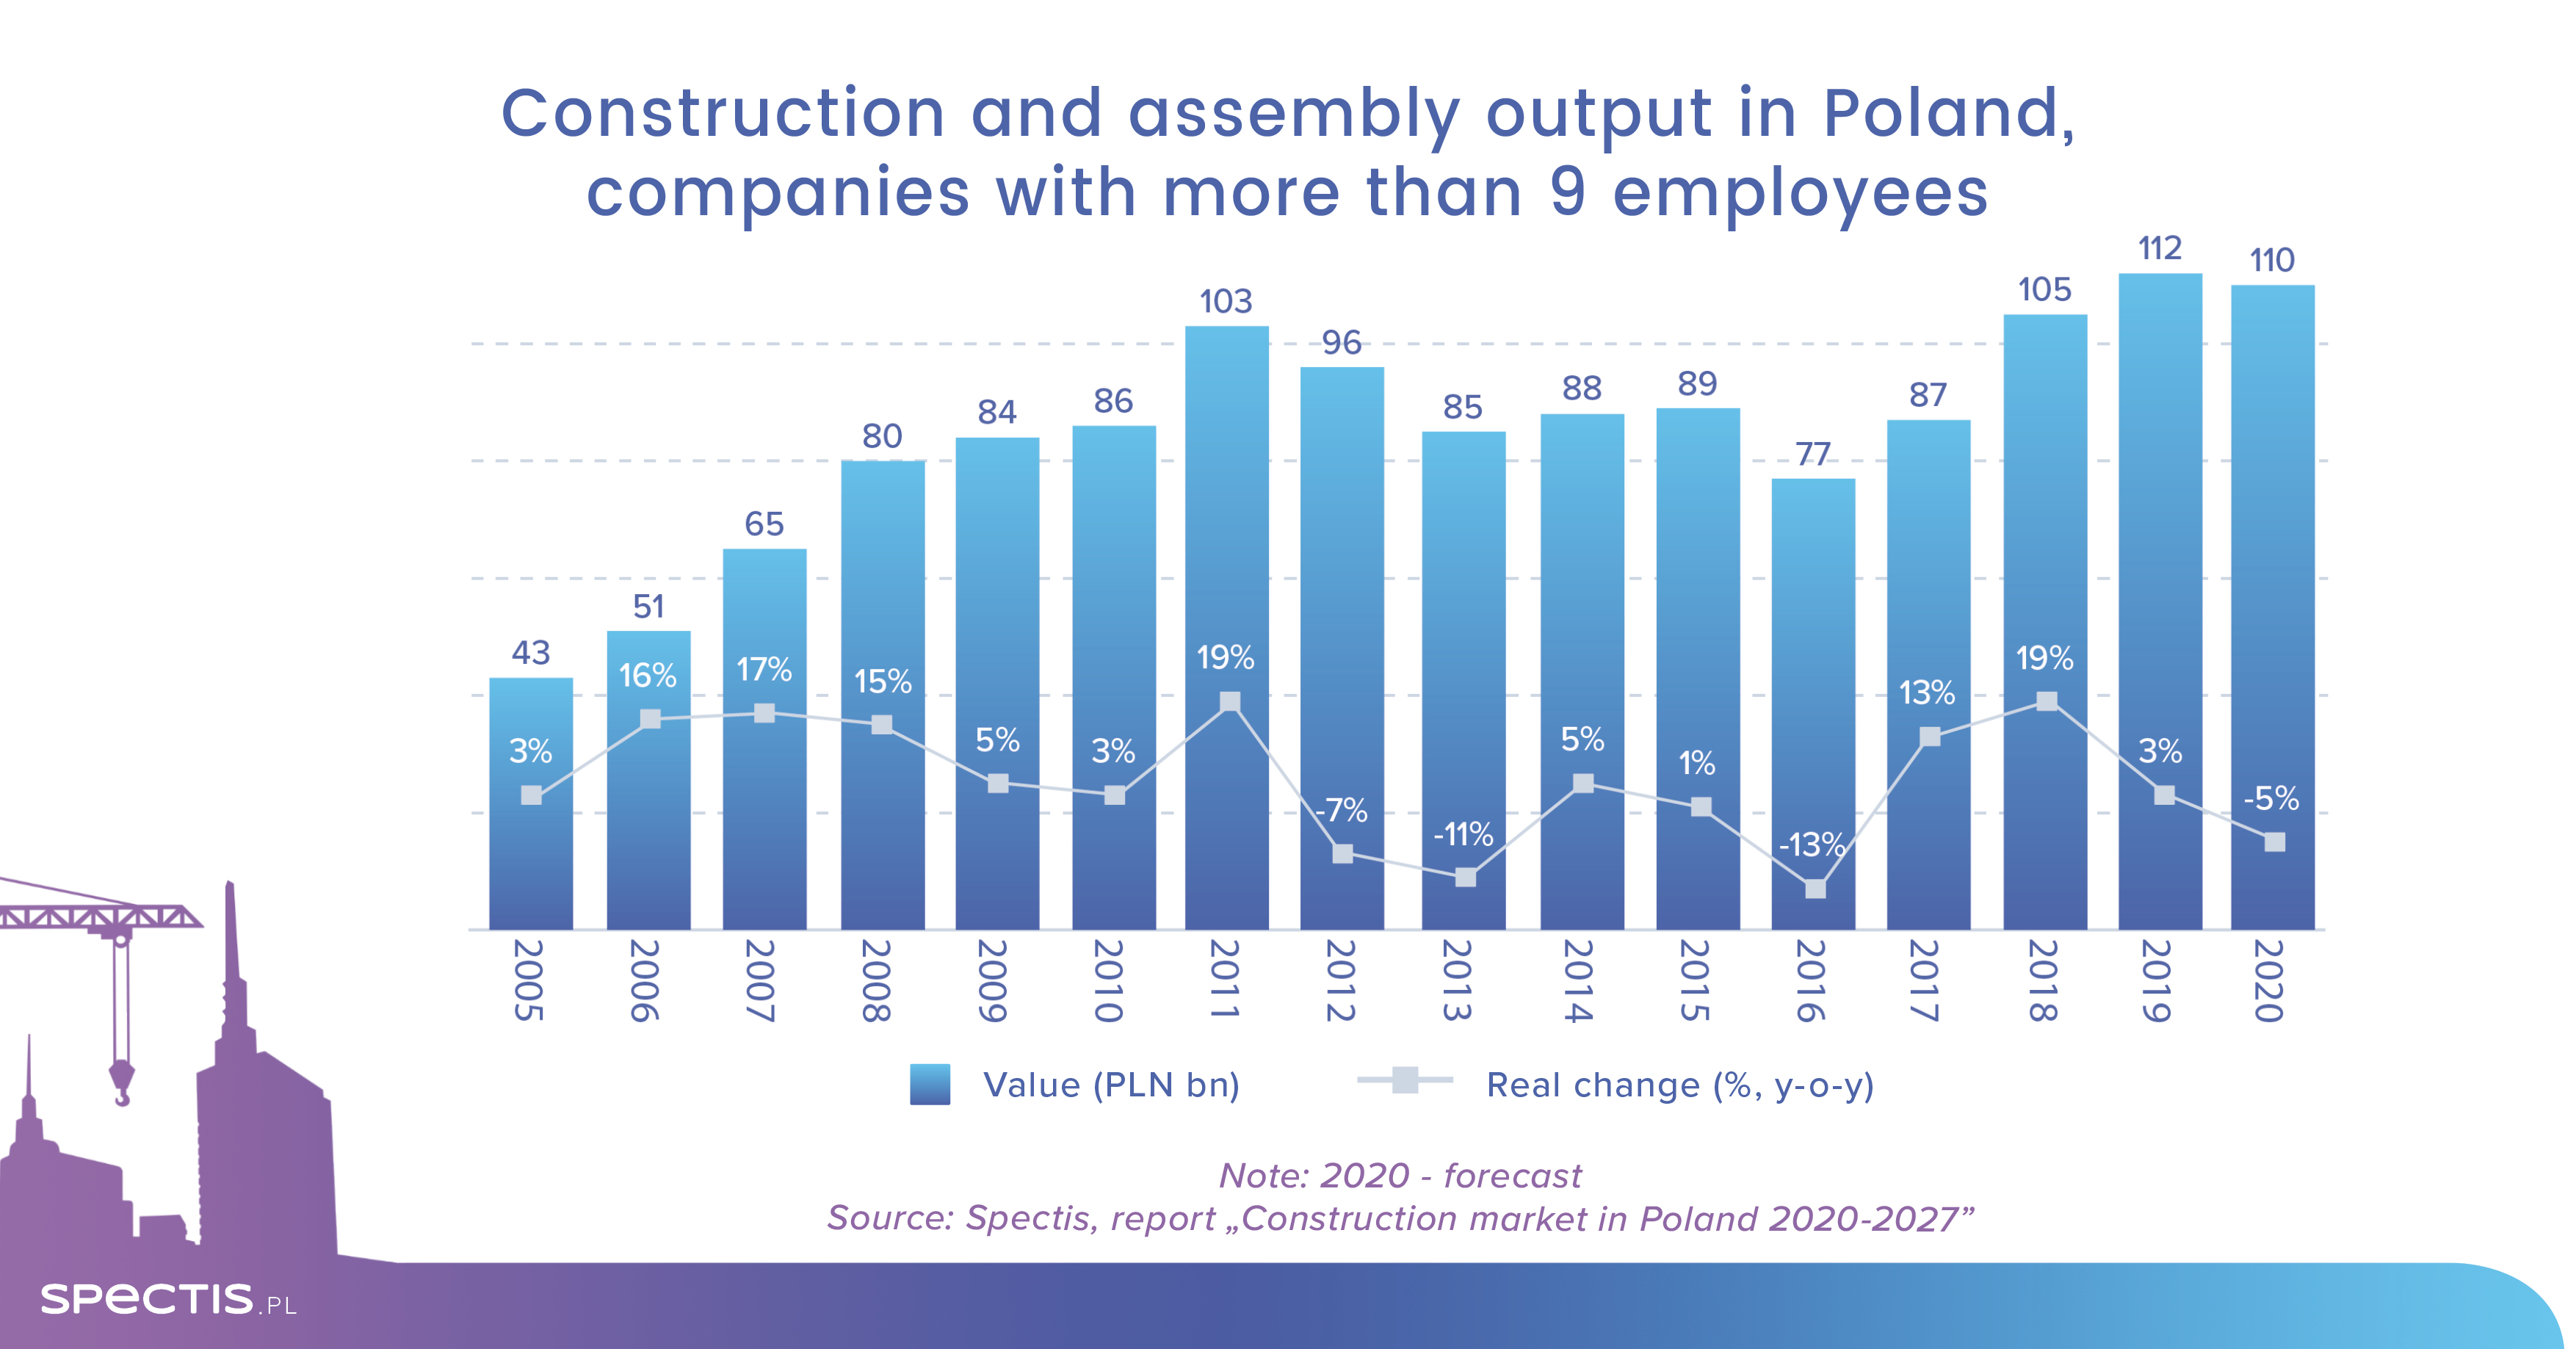 Construction market in Poland to shrink 3-5% in 2020